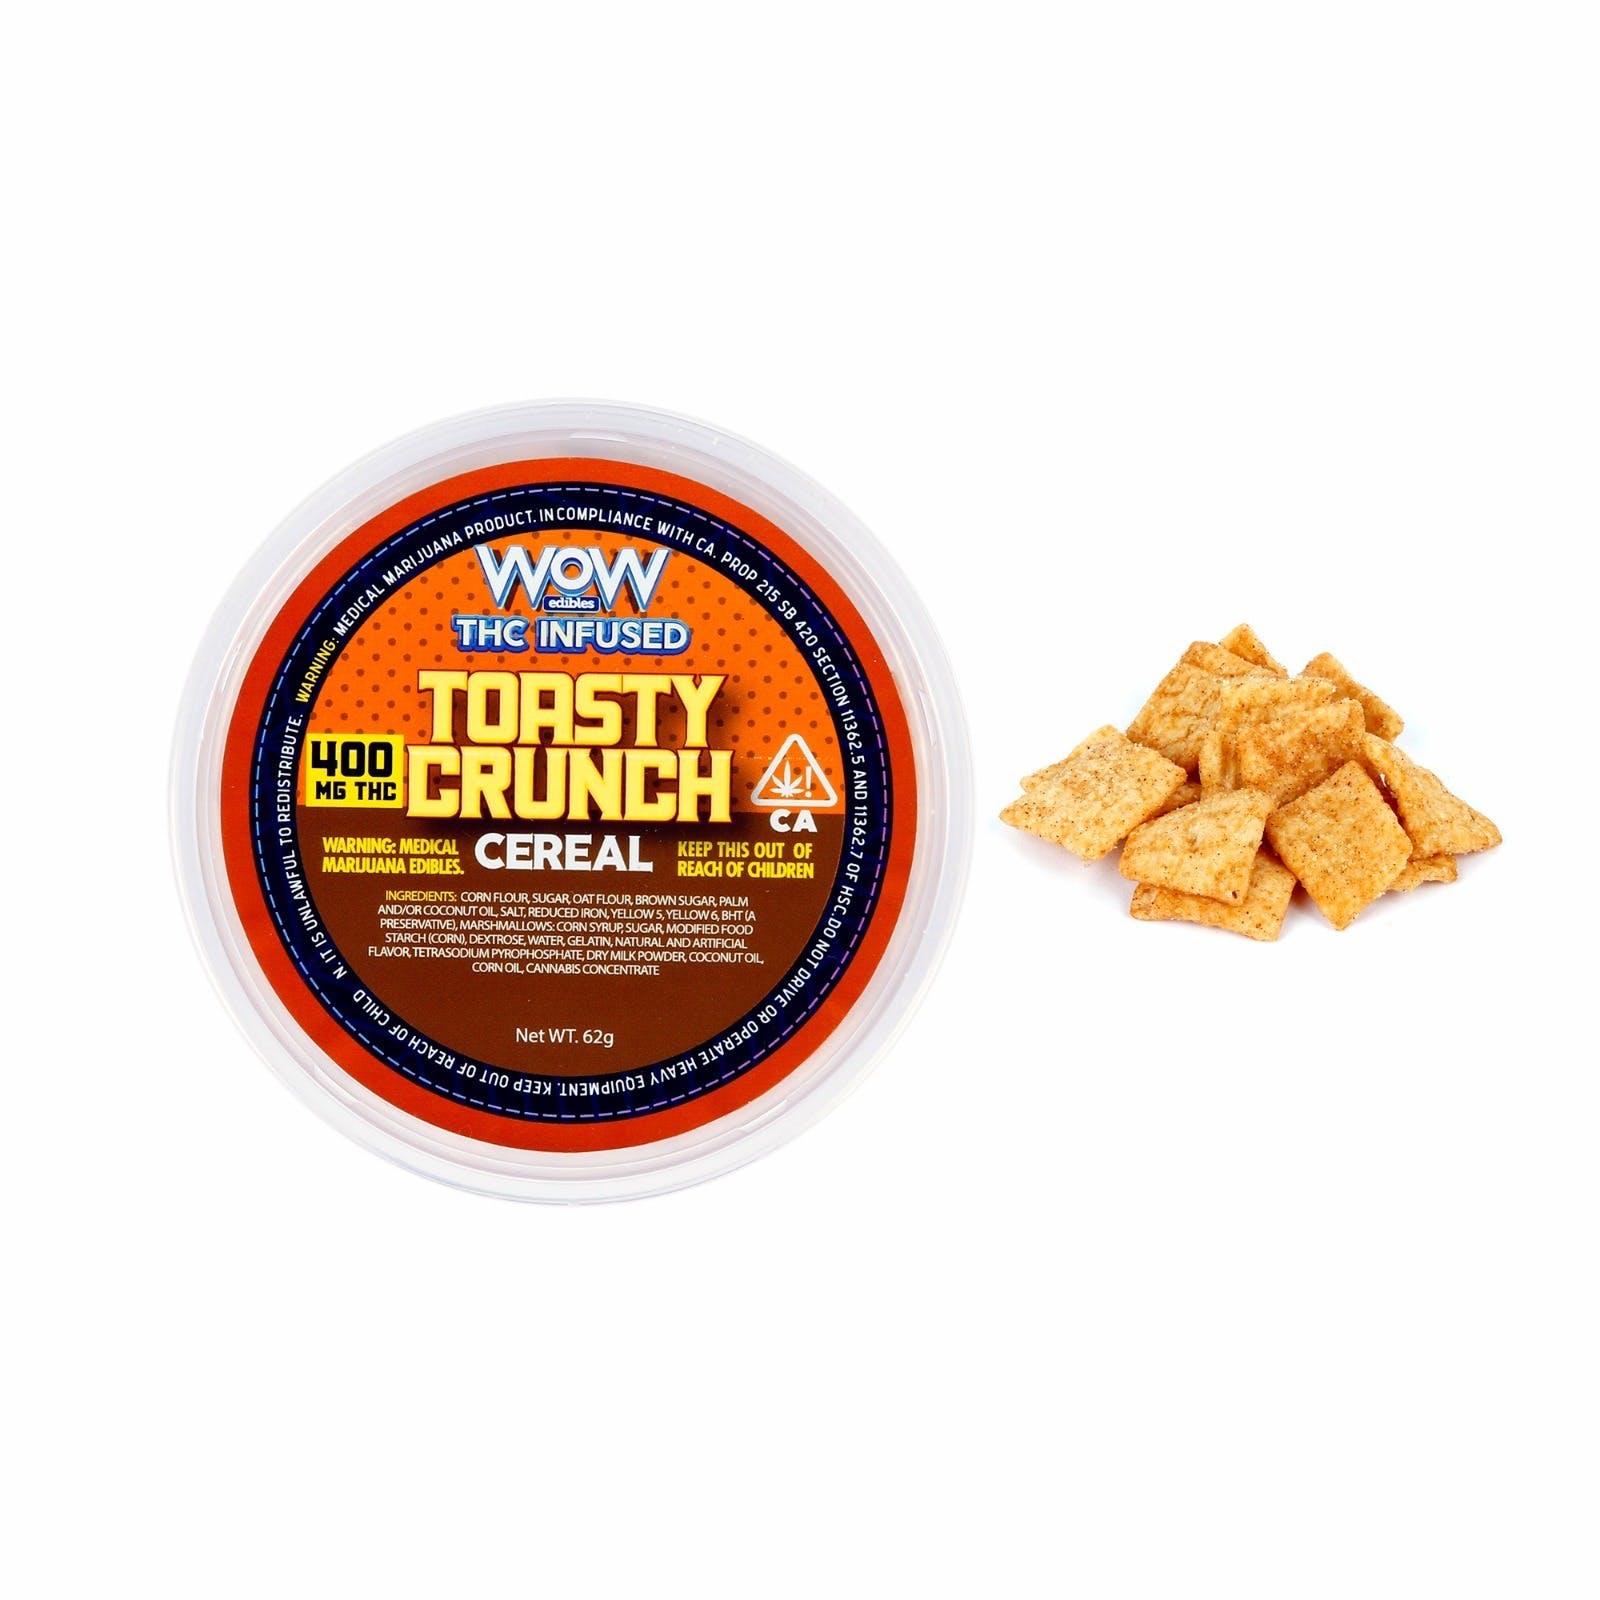 CEREAL - TOASTY CRUNCH 400MG